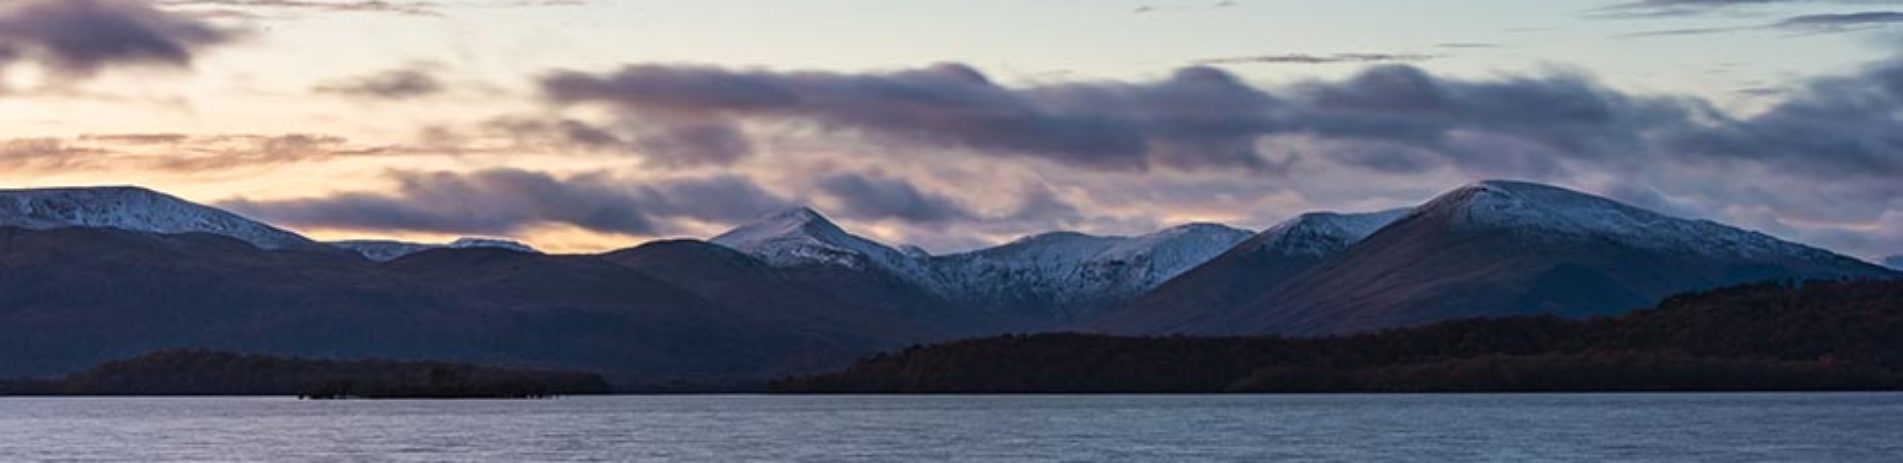 luss-hills-covered-with-a-smattering-of-snow-above-loch-lomond-and-dusk